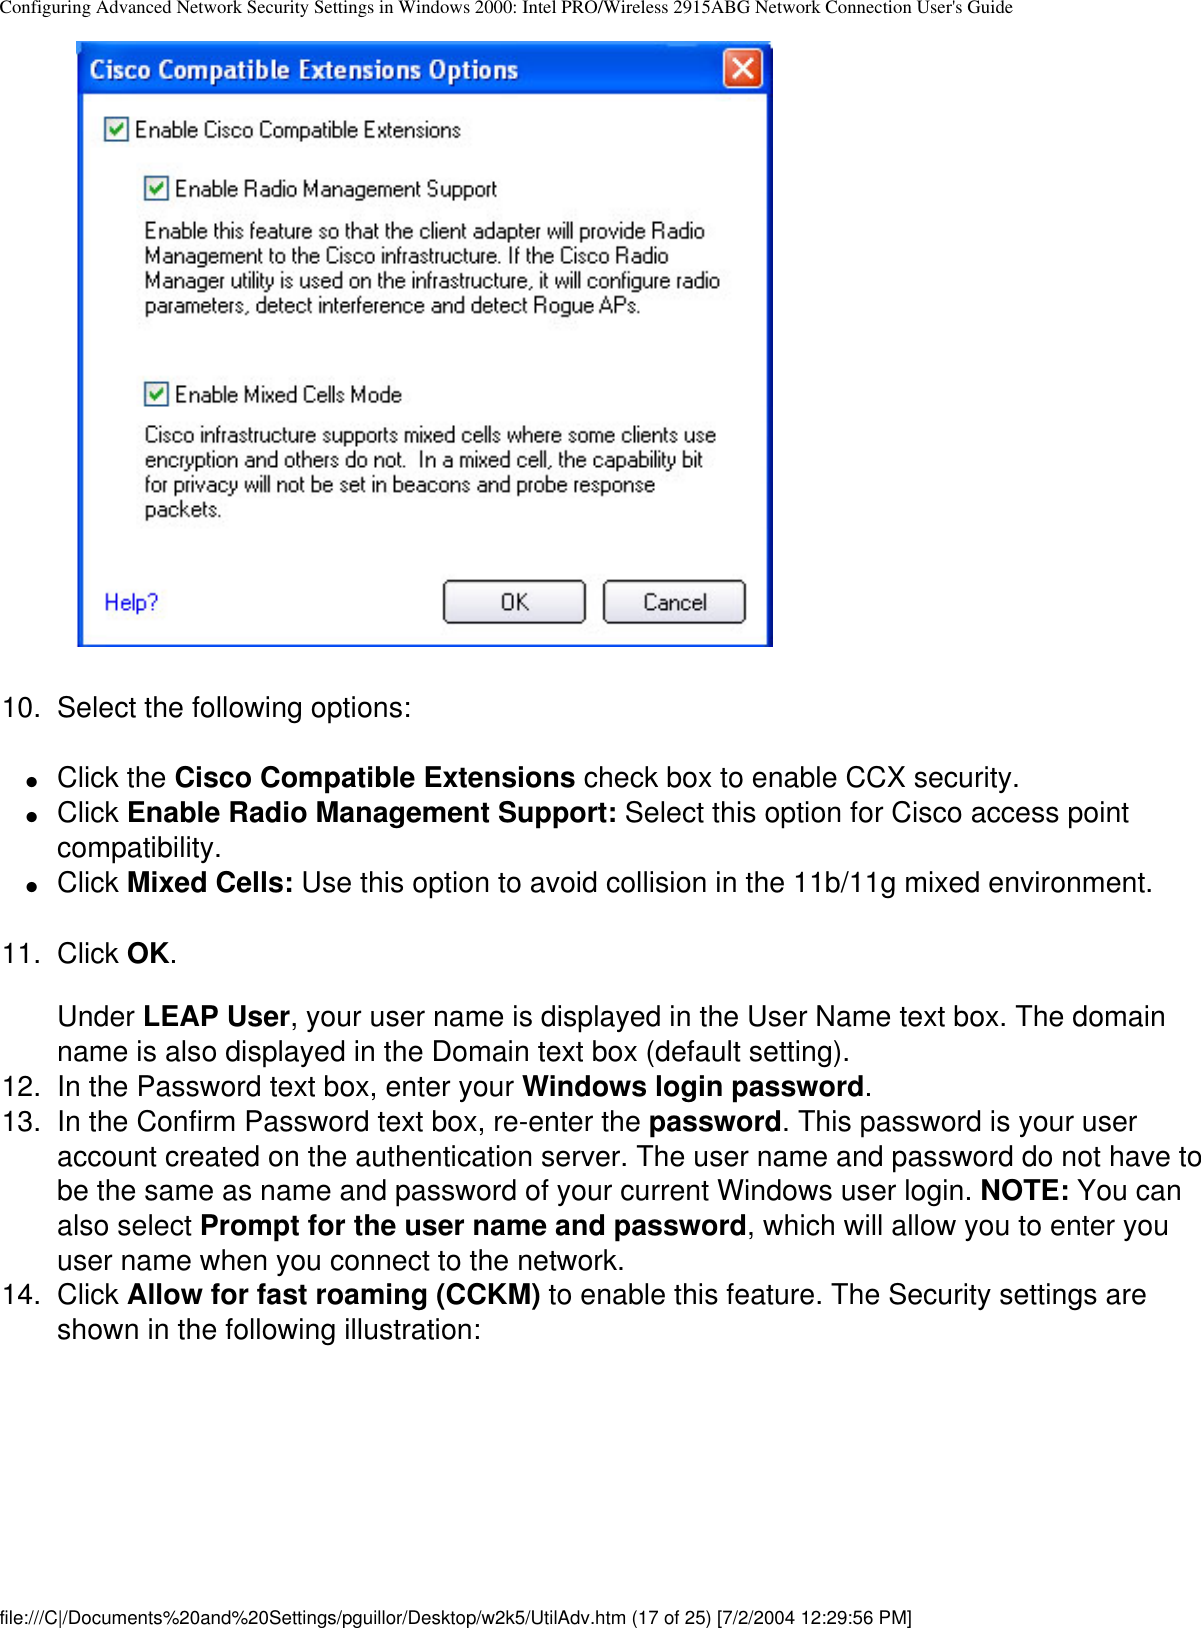 Configuring Advanced Network Security Settings in Windows 2000: Intel PRO/Wireless 2915ABG Network Connection User&apos;s Guide            10.  Select the following options:●     Click the Cisco Compatible Extensions check box to enable CCX security. ●     Click Enable Radio Management Support: Select this option for Cisco access point compatibility.●     Click Mixed Cells: Use this option to avoid collision in the 11b/11g mixed environment. 11.  Click OK.Under LEAP User, your user name is displayed in the User Name text box. The domain name is also displayed in the Domain text box (default setting). 12.  In the Password text box, enter your Windows login password. 13.  In the Confirm Password text box, re-enter the password. This password is your user account created on the authentication server. The user name and password do not have to be the same as name and password of your current Windows user login. NOTE: You can also select Prompt for the user name and password, which will allow you to enter you user name when you connect to the network.14.  Click Allow for fast roaming (CCKM) to enable this feature. The Security settings are shown in the following illustration:            file:///C|/Documents%20and%20Settings/pguillor/Desktop/w2k5/UtilAdv.htm (17 of 25) [7/2/2004 12:29:56 PM]